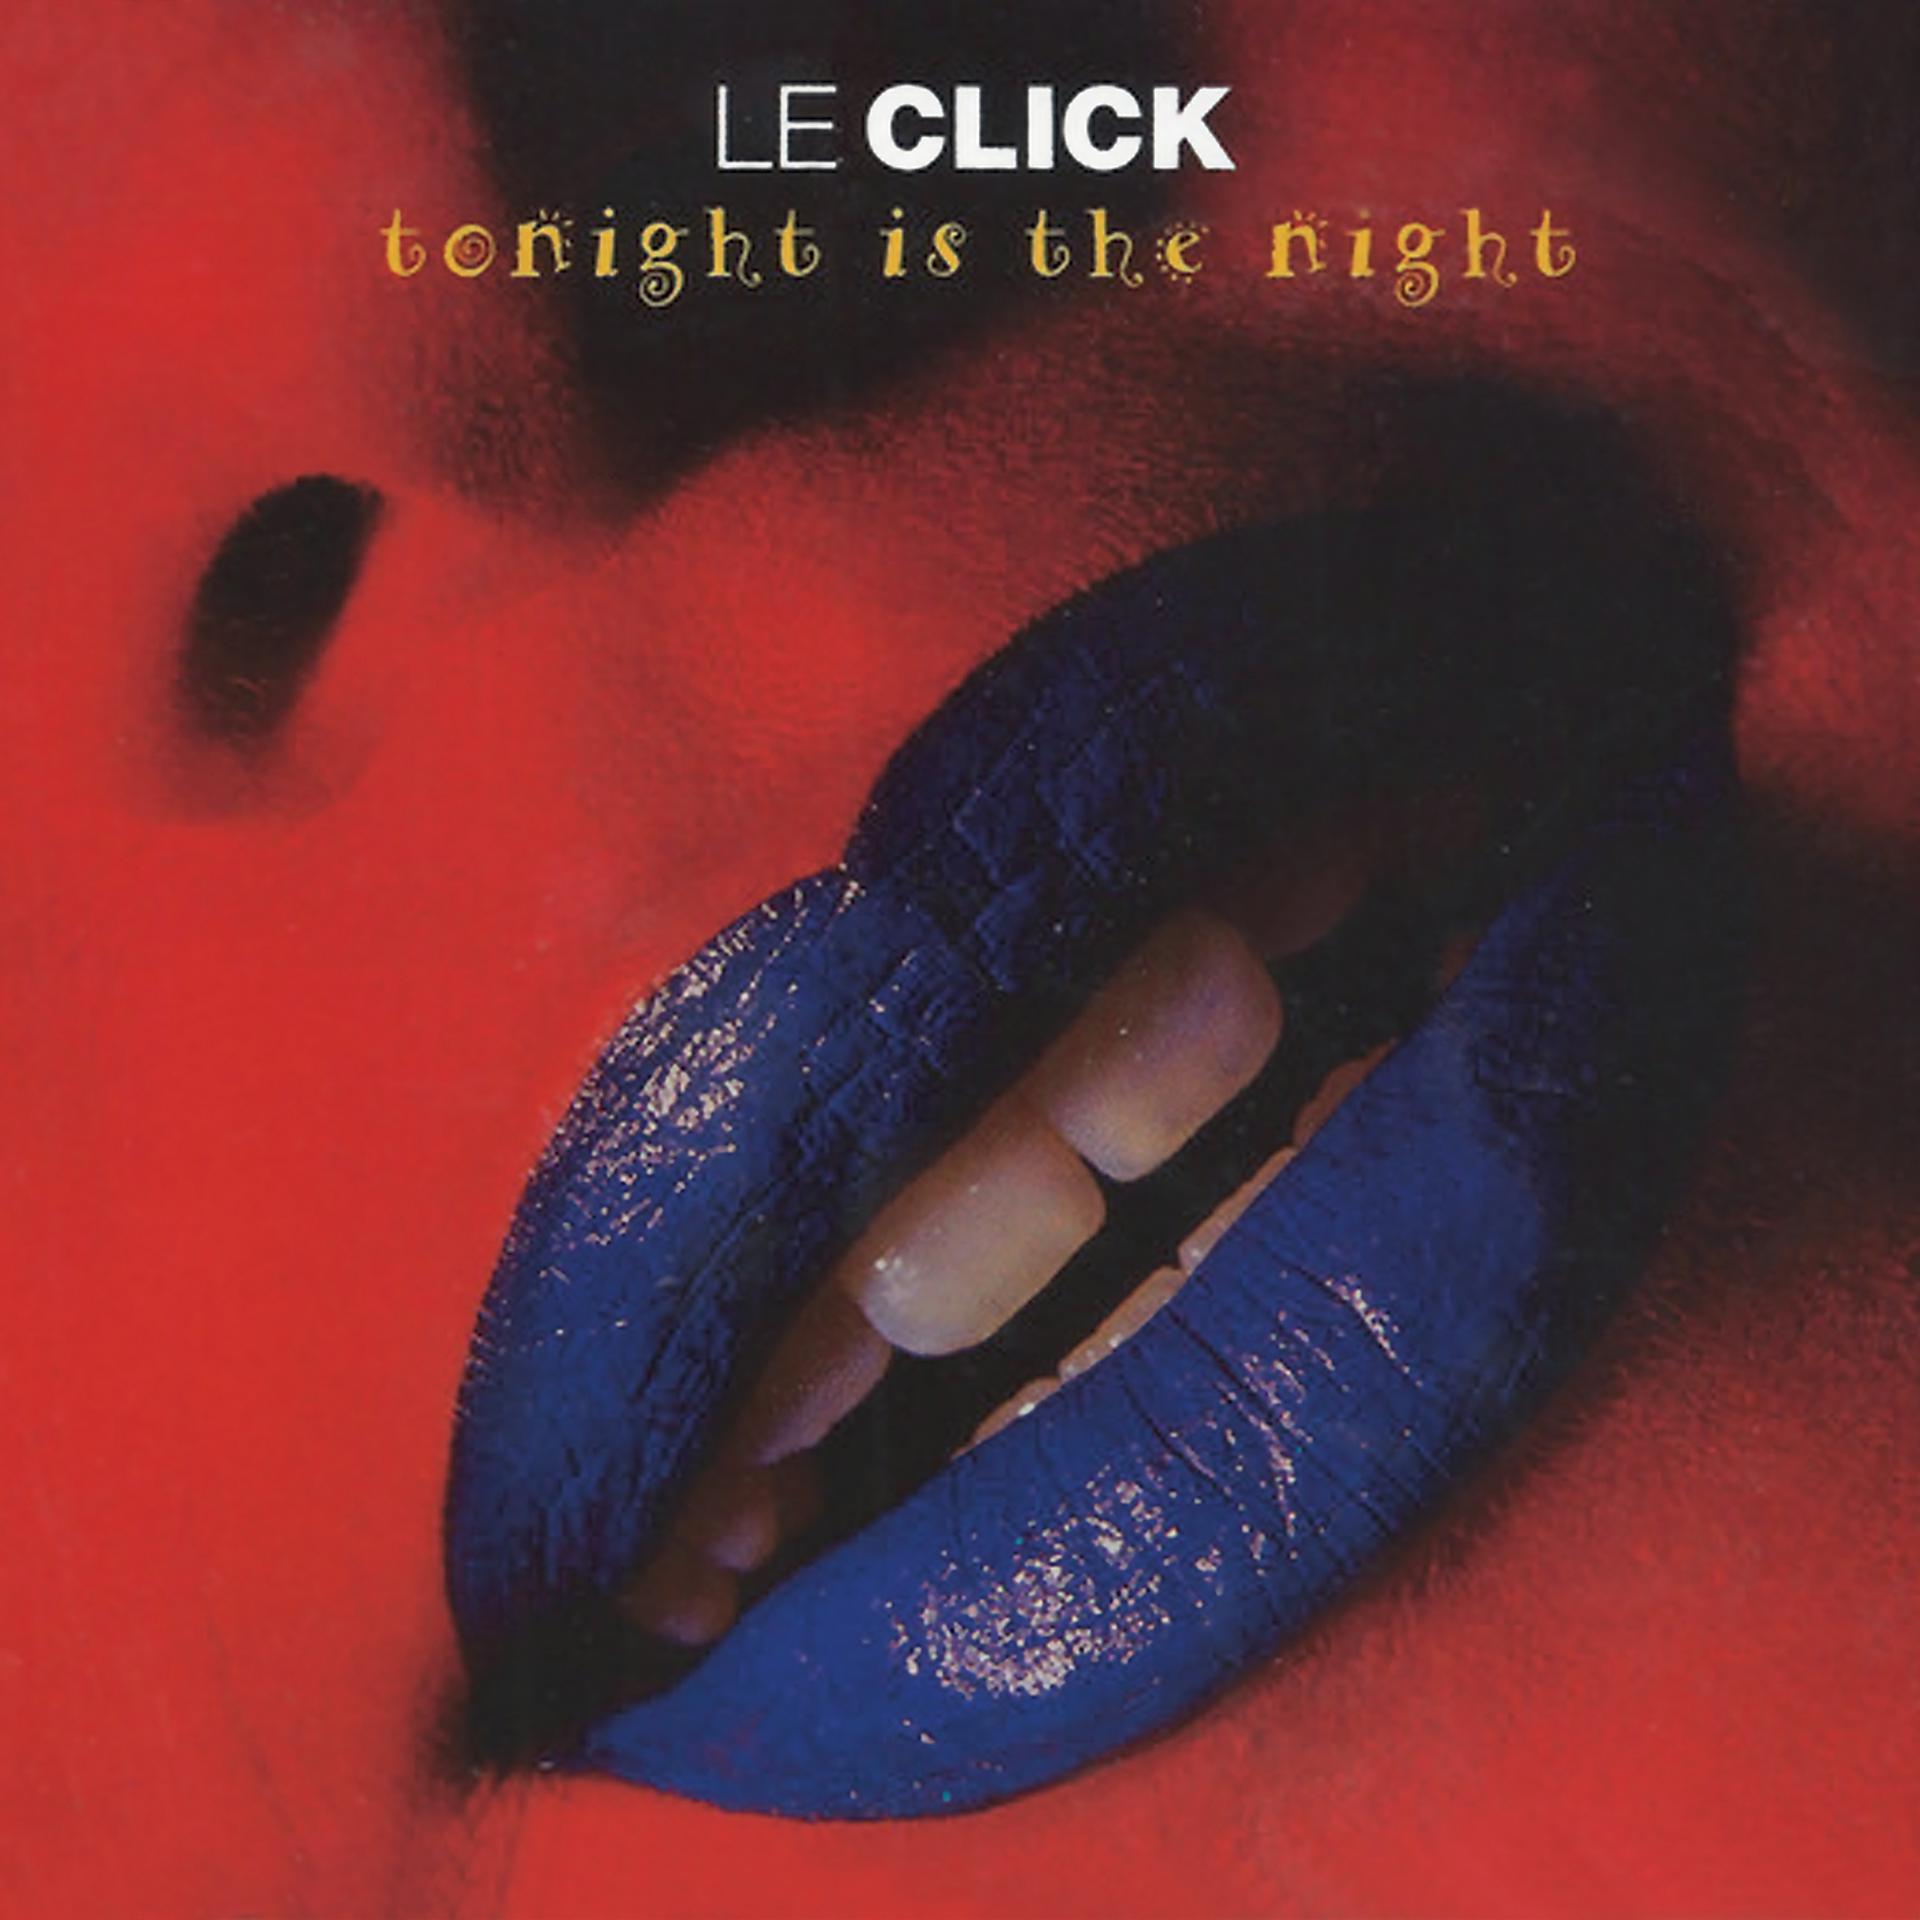 Le click Tonight is the Night. Tonight's the Night. La bouche le click - Tonight is the Night. Le click